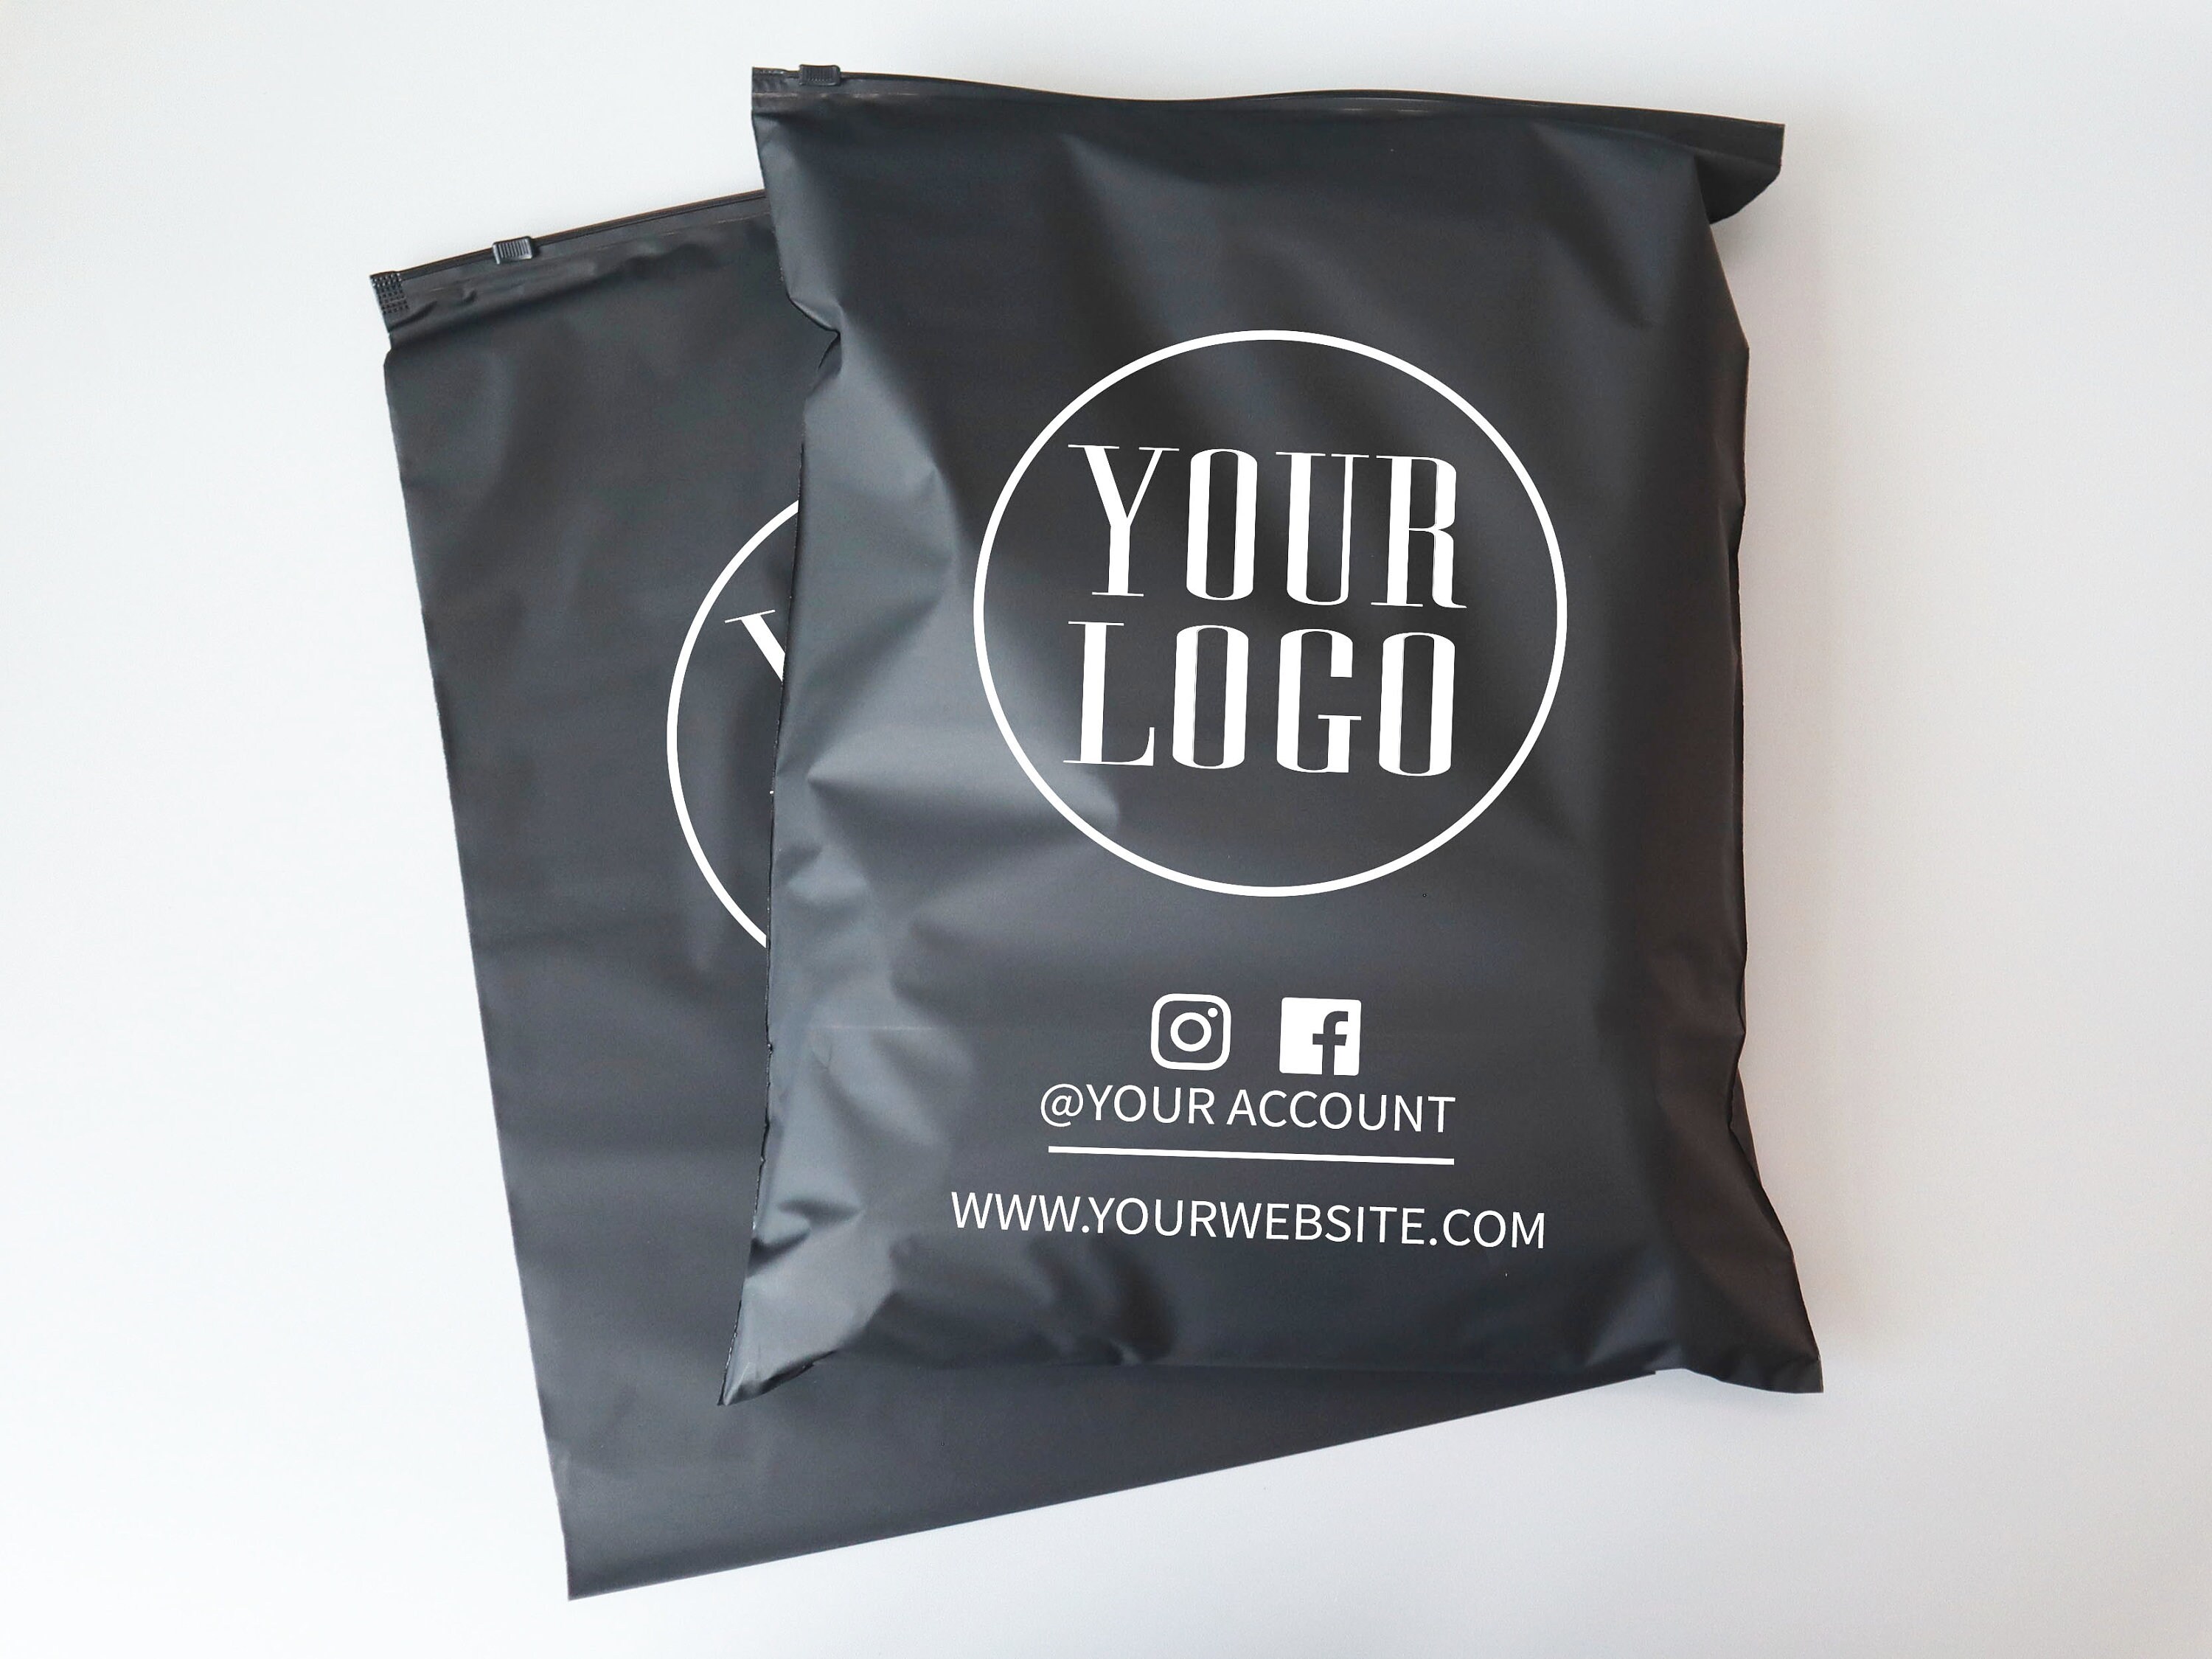 Black Zipper Bags With Logocustomized Clothing Bags for - Etsy